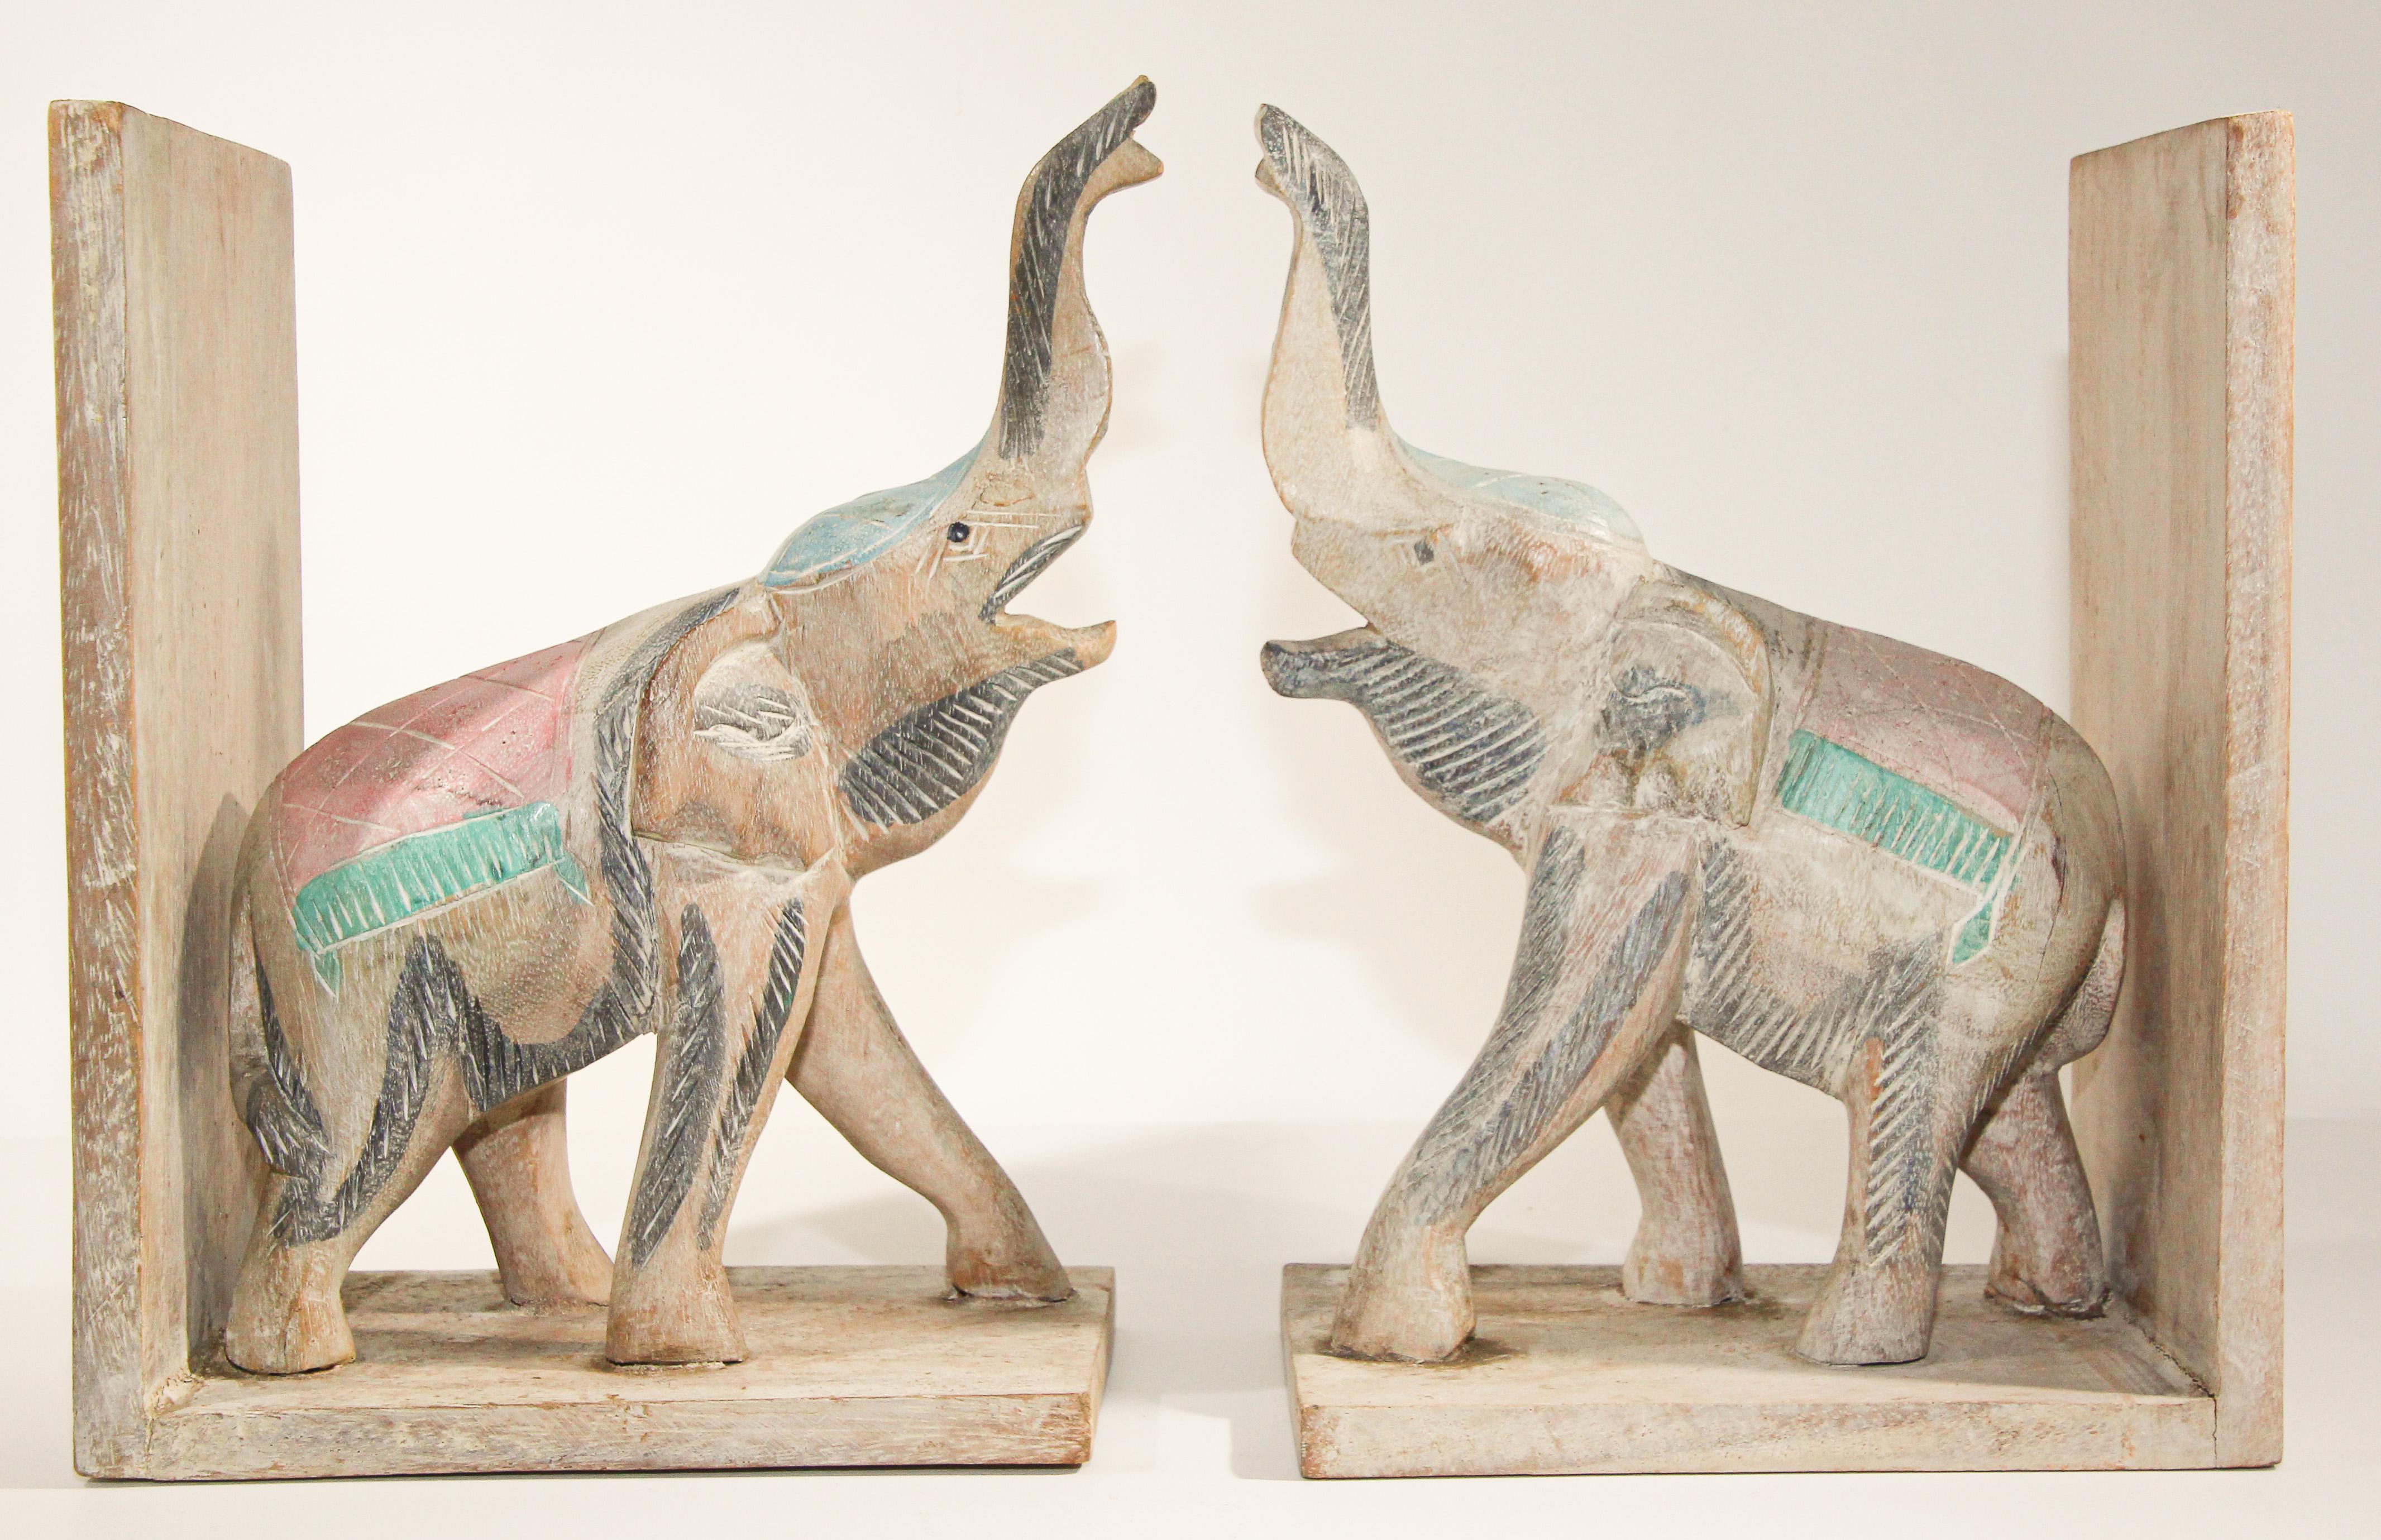 Indian Hand Carved Wooden Elephant Bookends For Sale